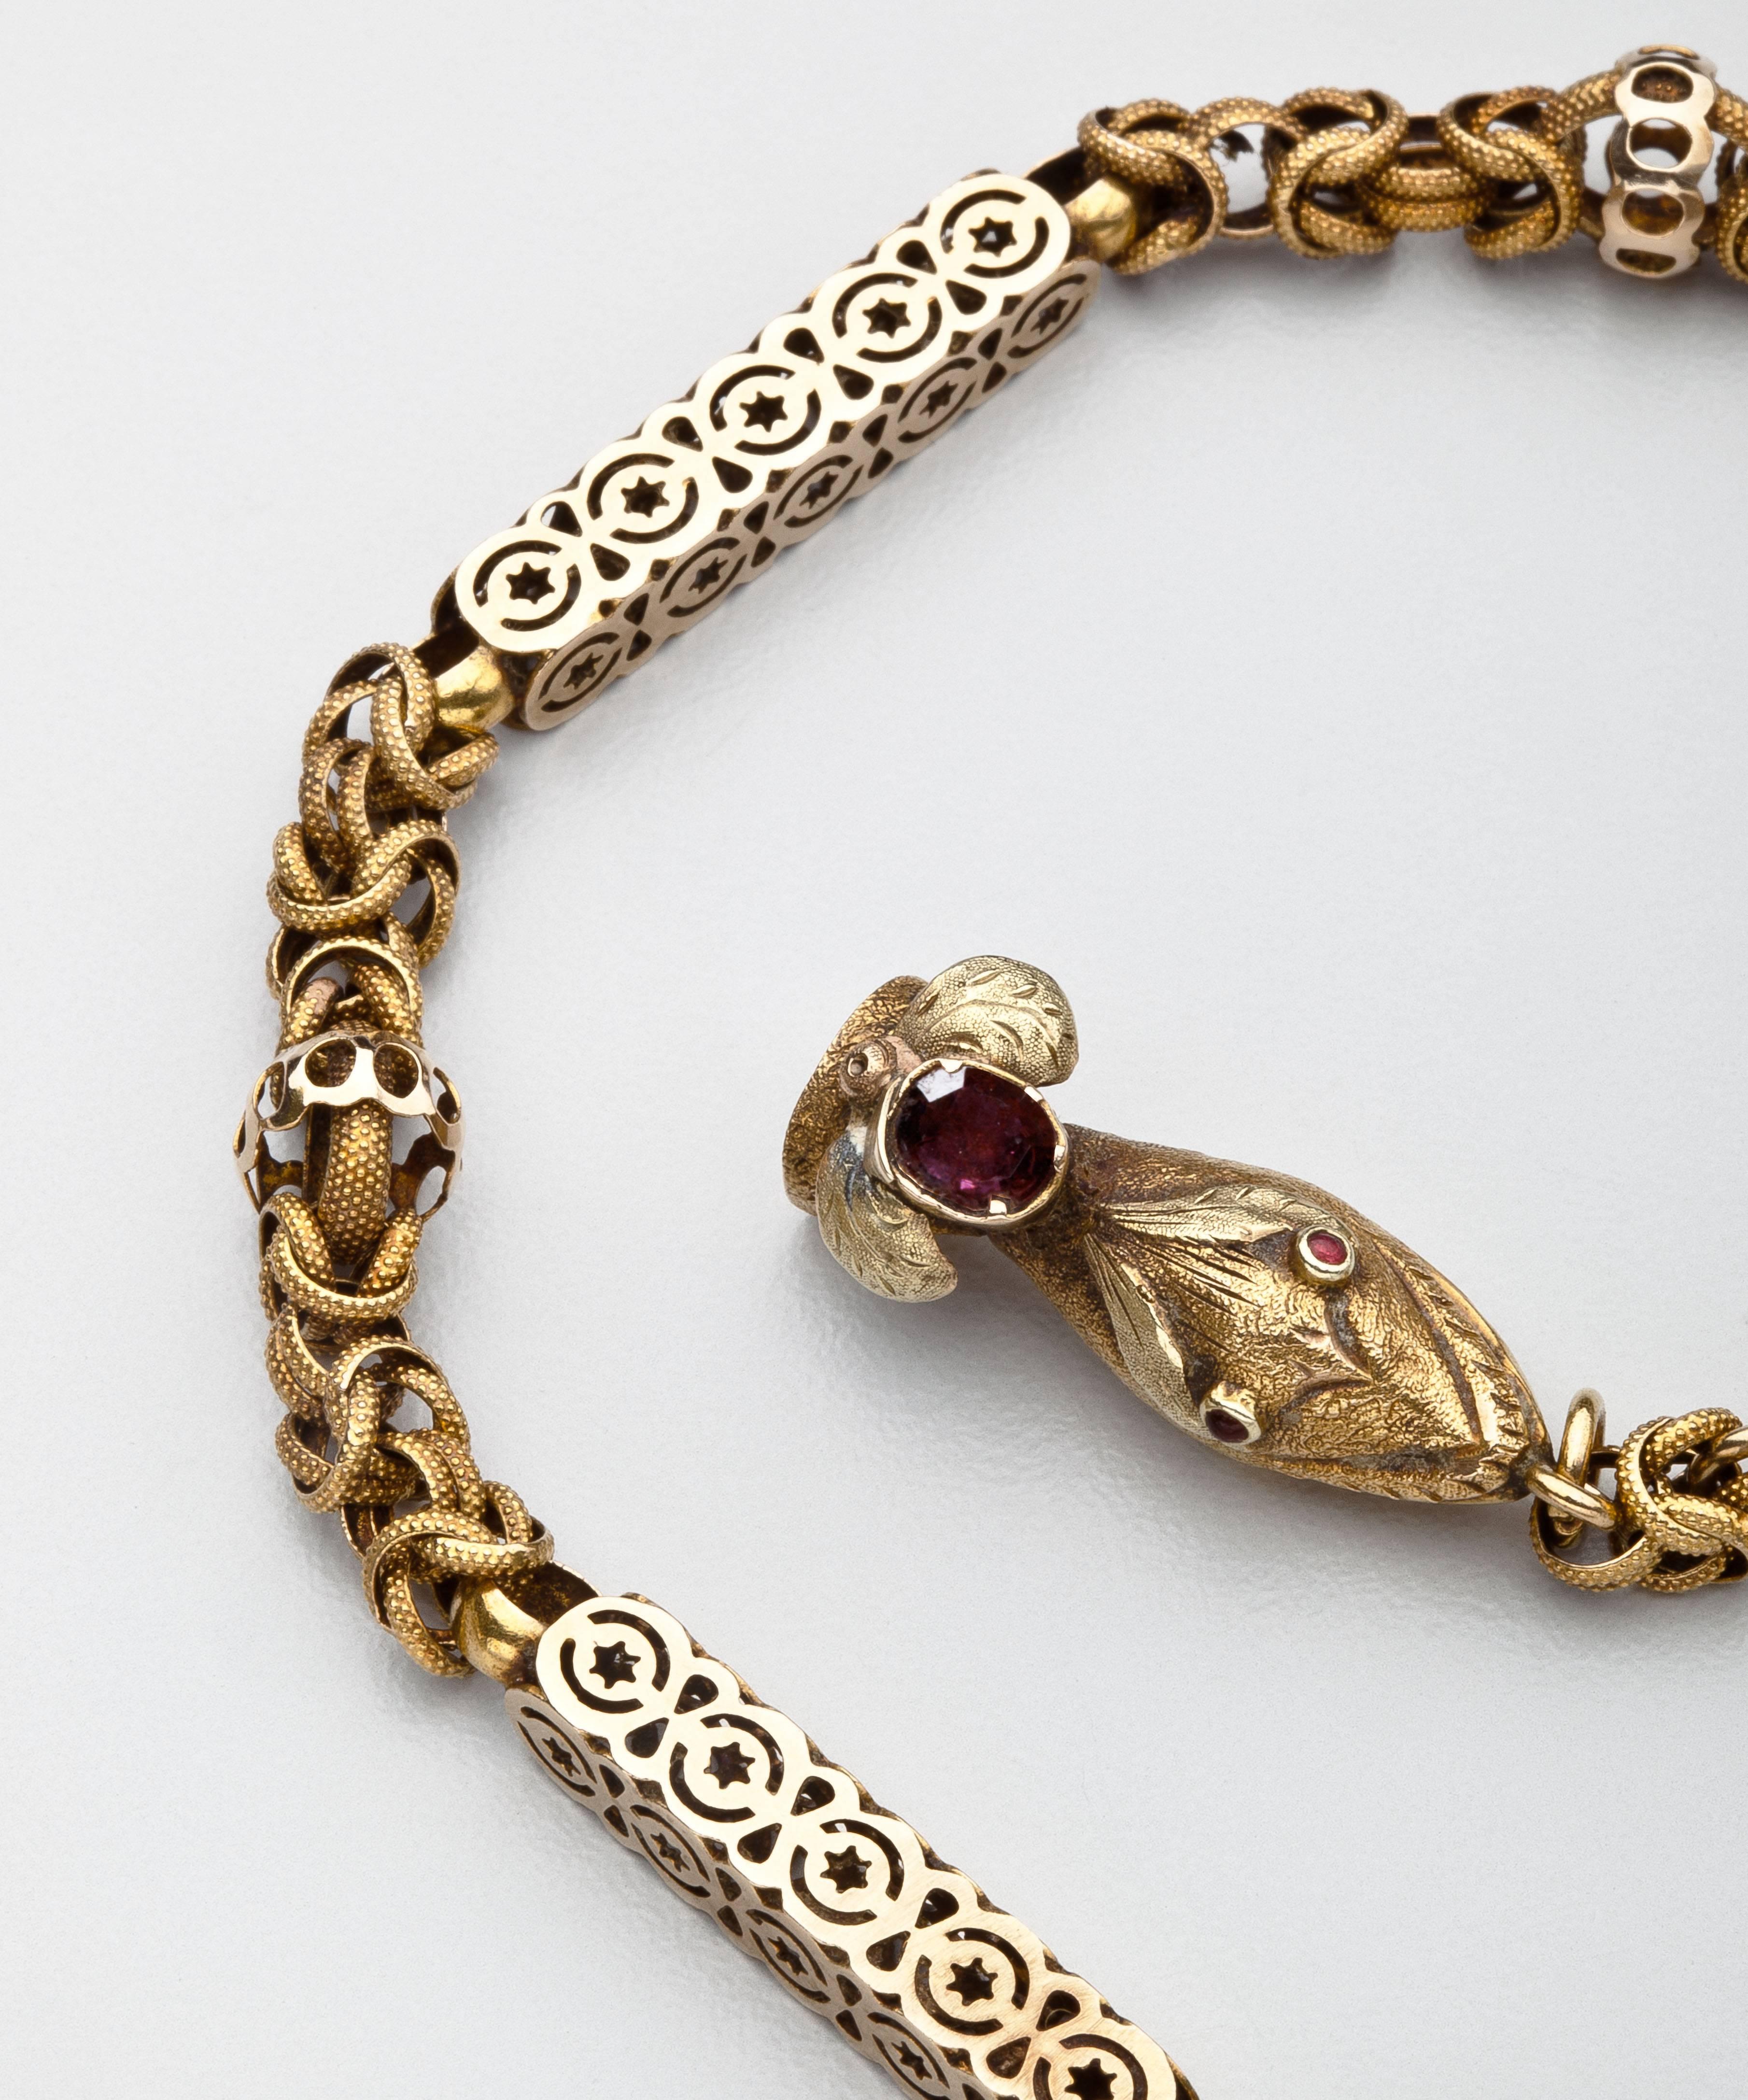 A long four foot antique  gold chain in the Gothic revival style with Moorish overtones of design.  The 15 karat gold chain culminates in  a snake head clasp accented with garnet eyes.    